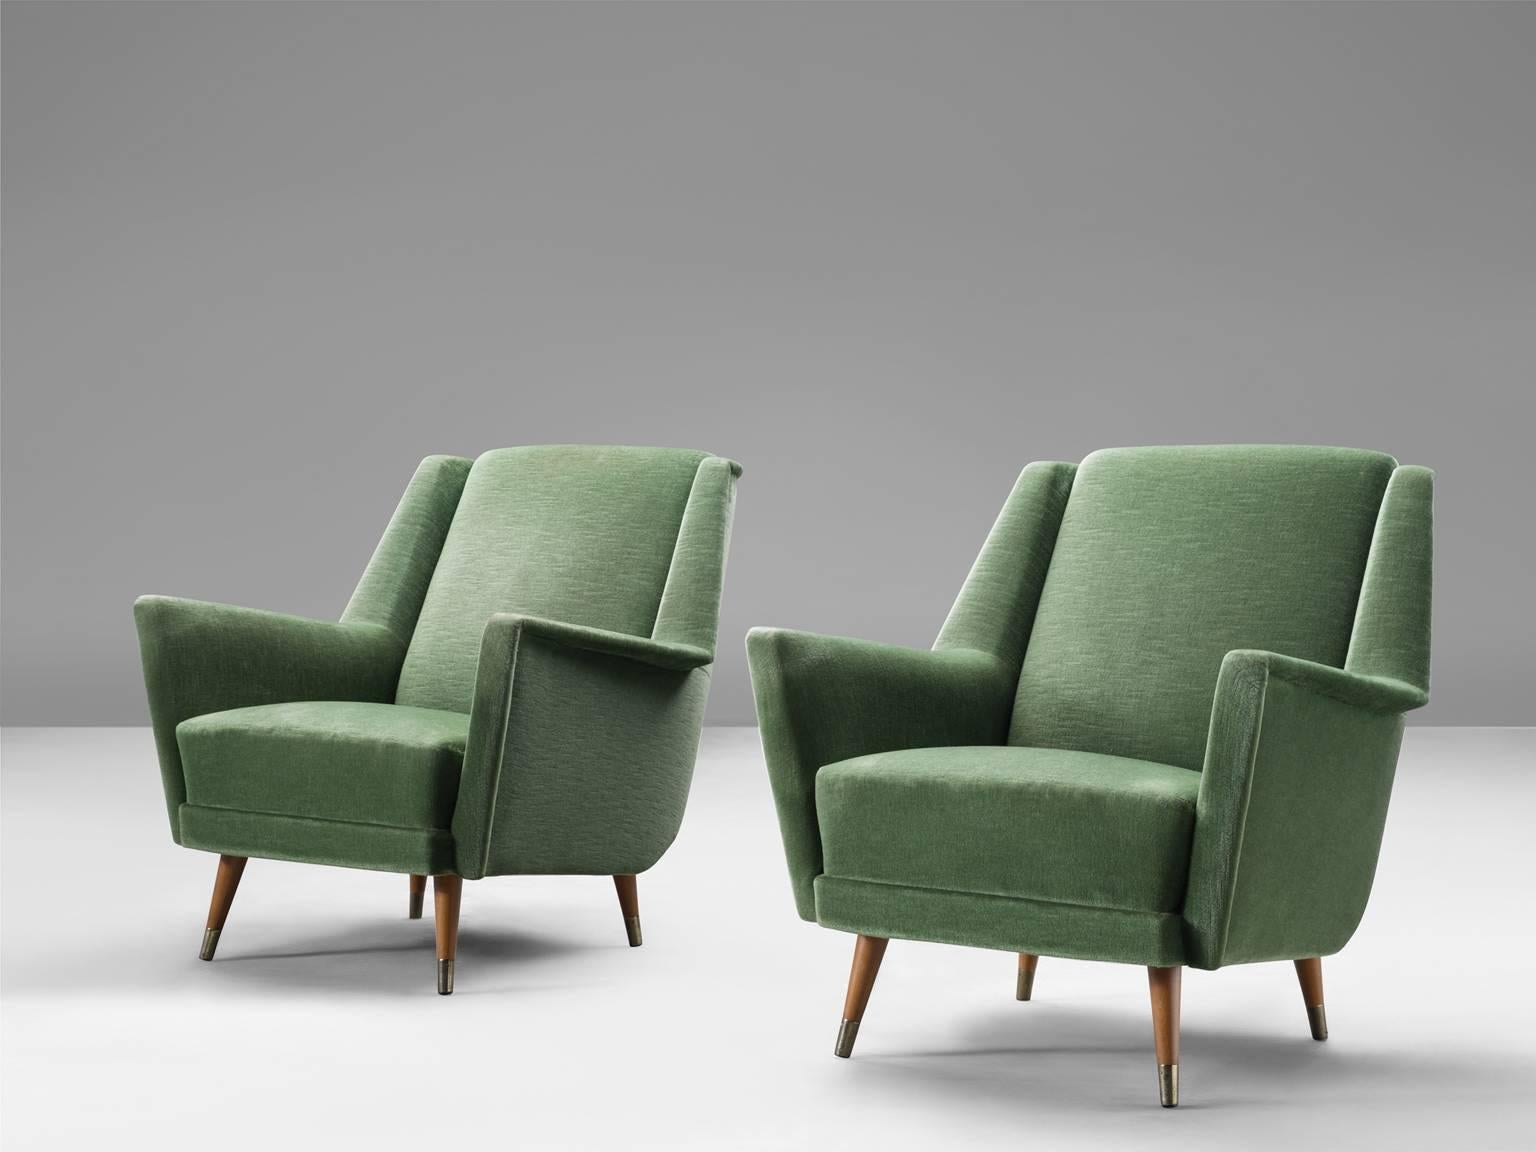 Two armchairs, green velvet and wood, Italy, 1960s.

These two medium-sized green lounge chairs feature small brass and wood feet with a comfortable seat. The seat shows both organic and geometric shapes. The armrests point slight upwards for